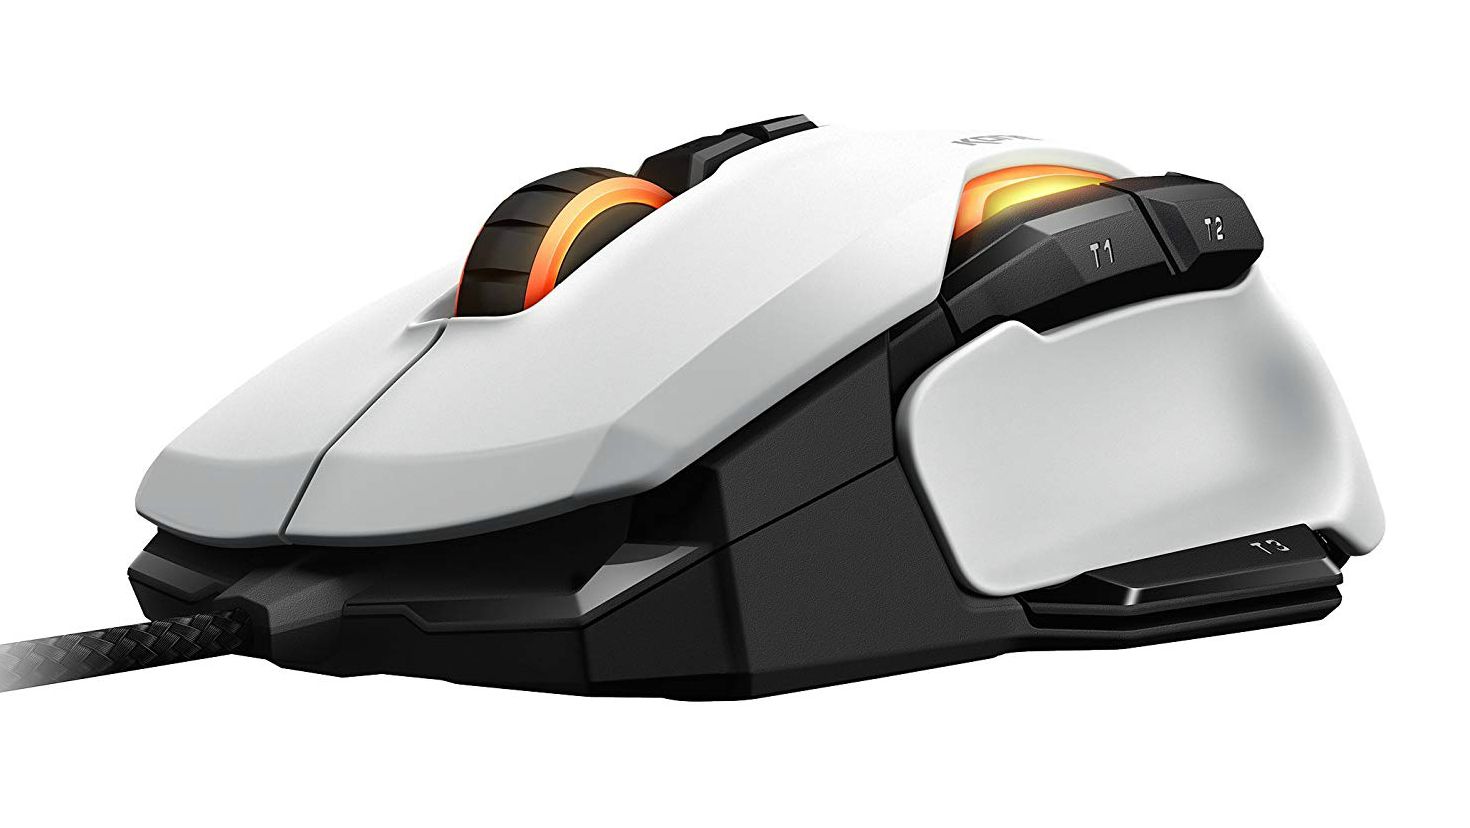 Roccat Kone AIMO best gaming mouse